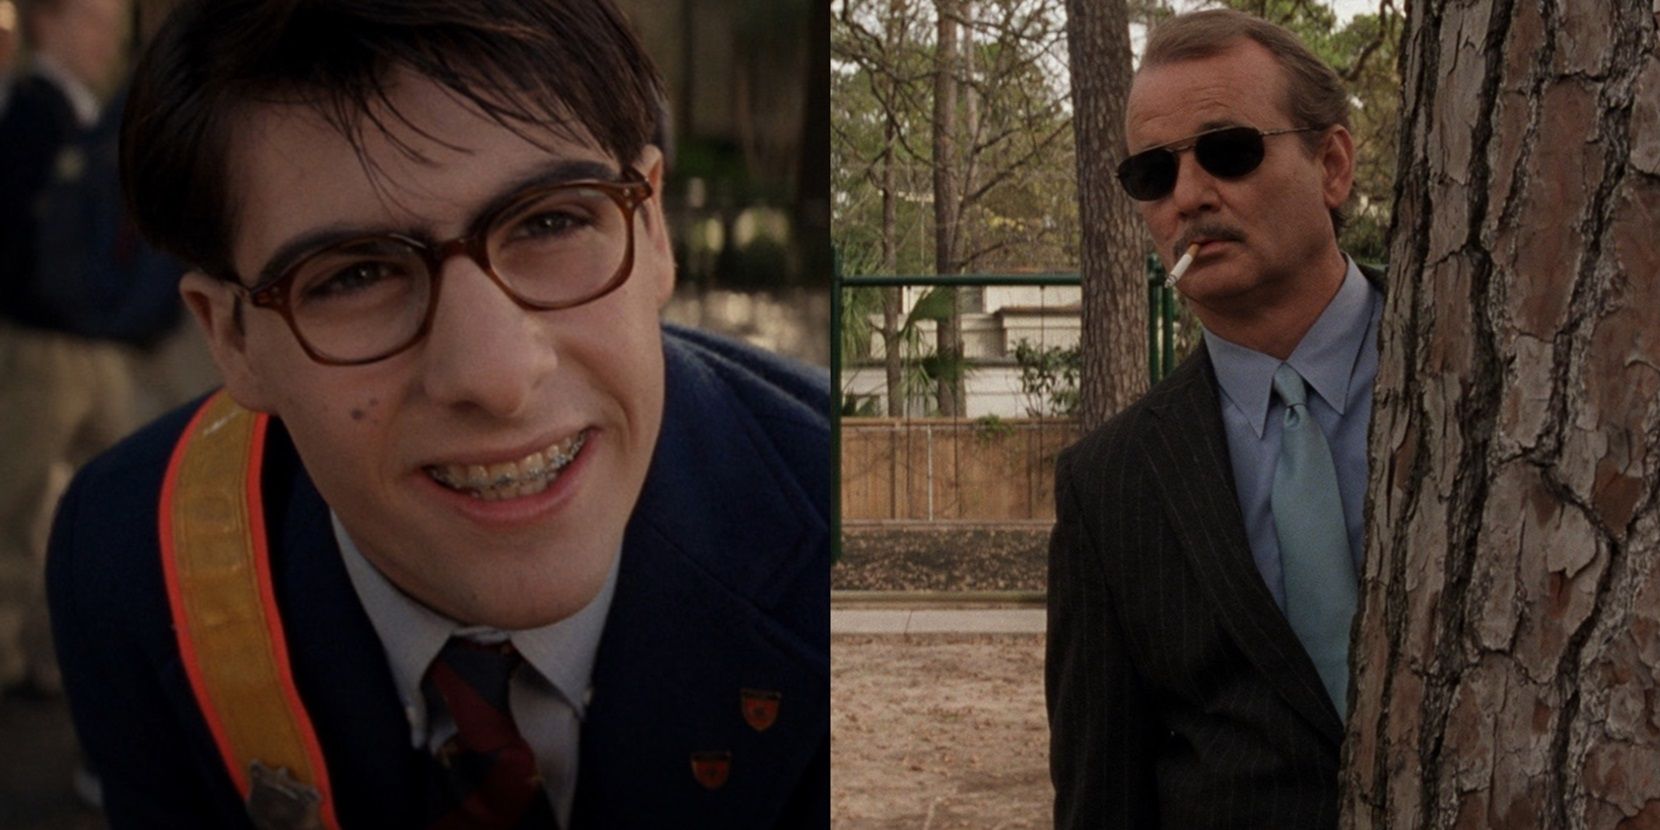 A split image depicts Jason Schwartzman and Bill Murray in their Rushmore roles